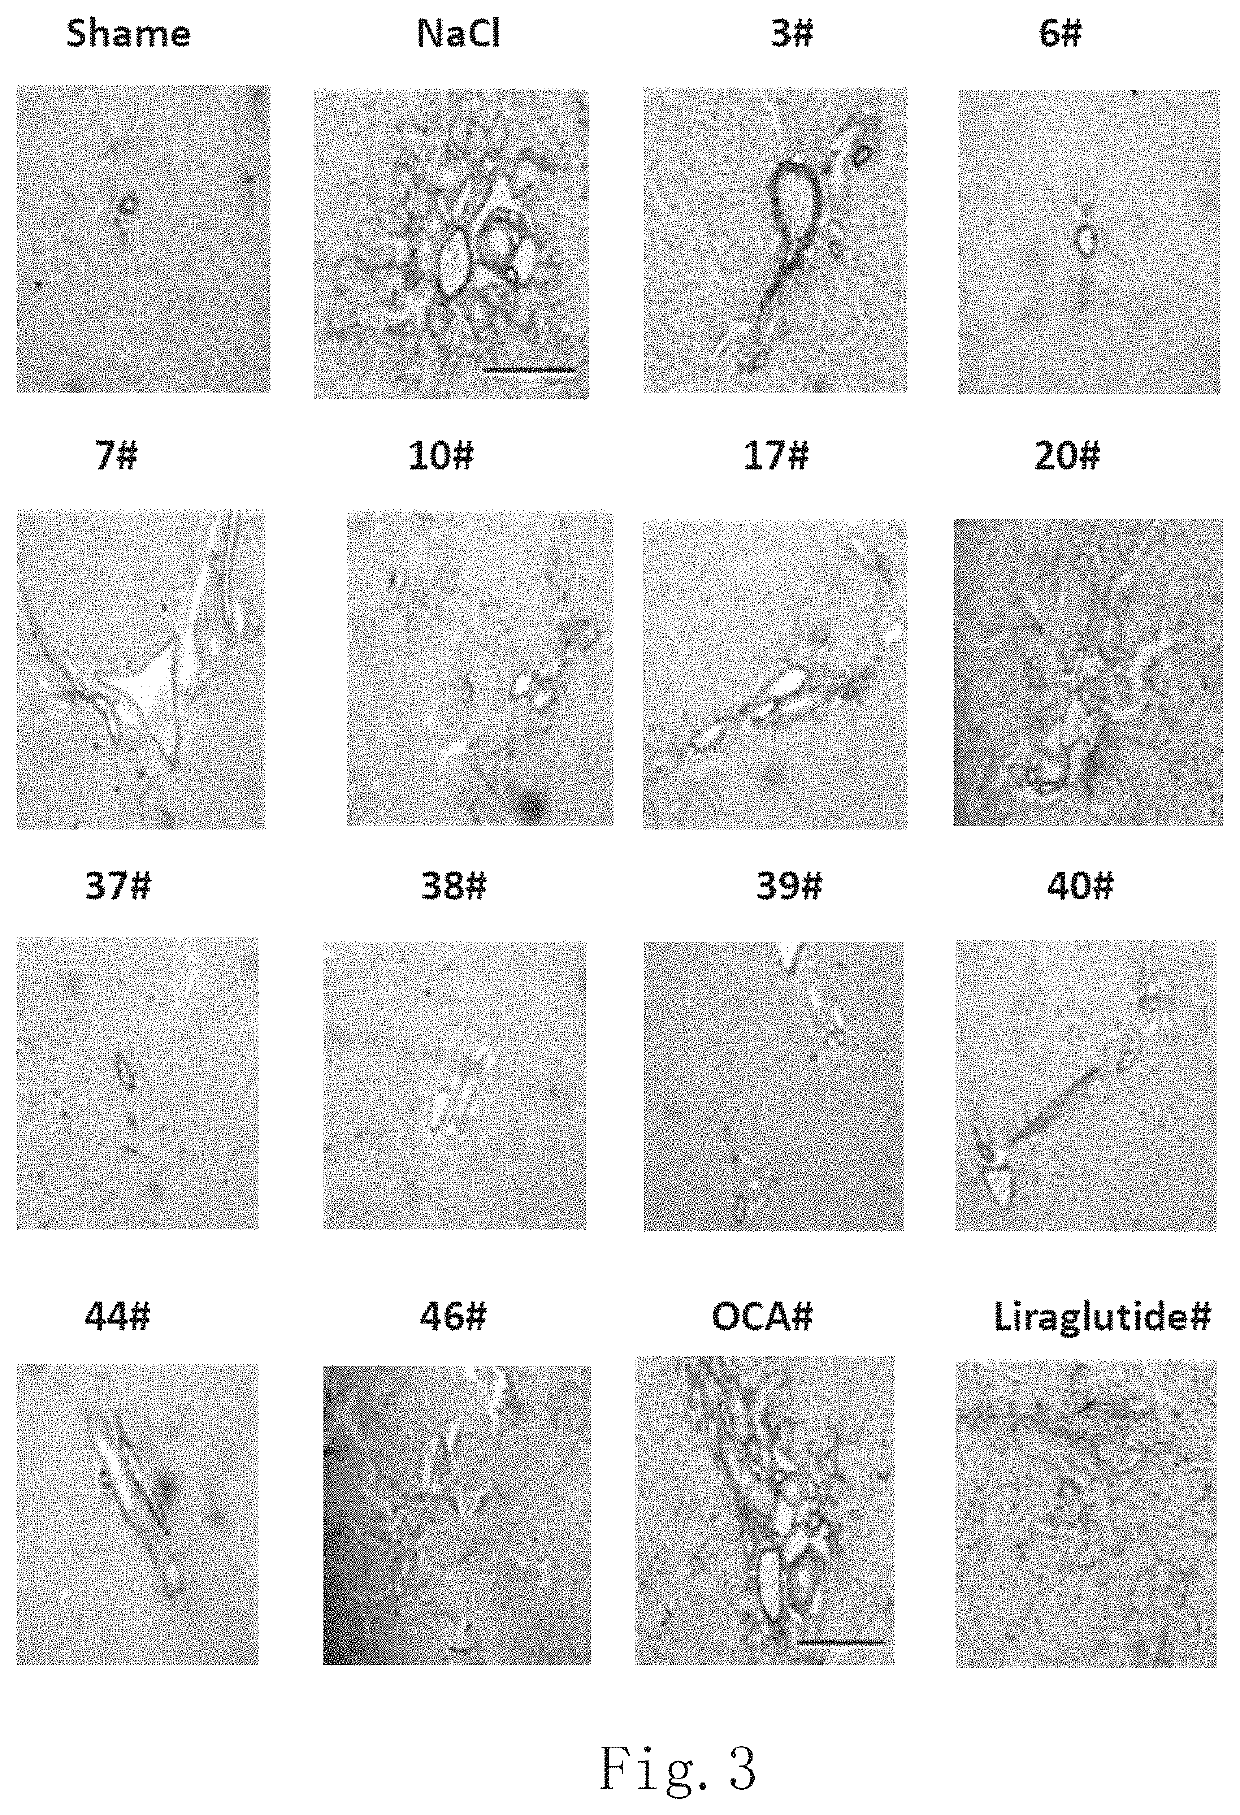 Treatment of biliary cirrhosis based on oxyntomodulin analogue GLP-1R/GCGR dual-target agonist peptide